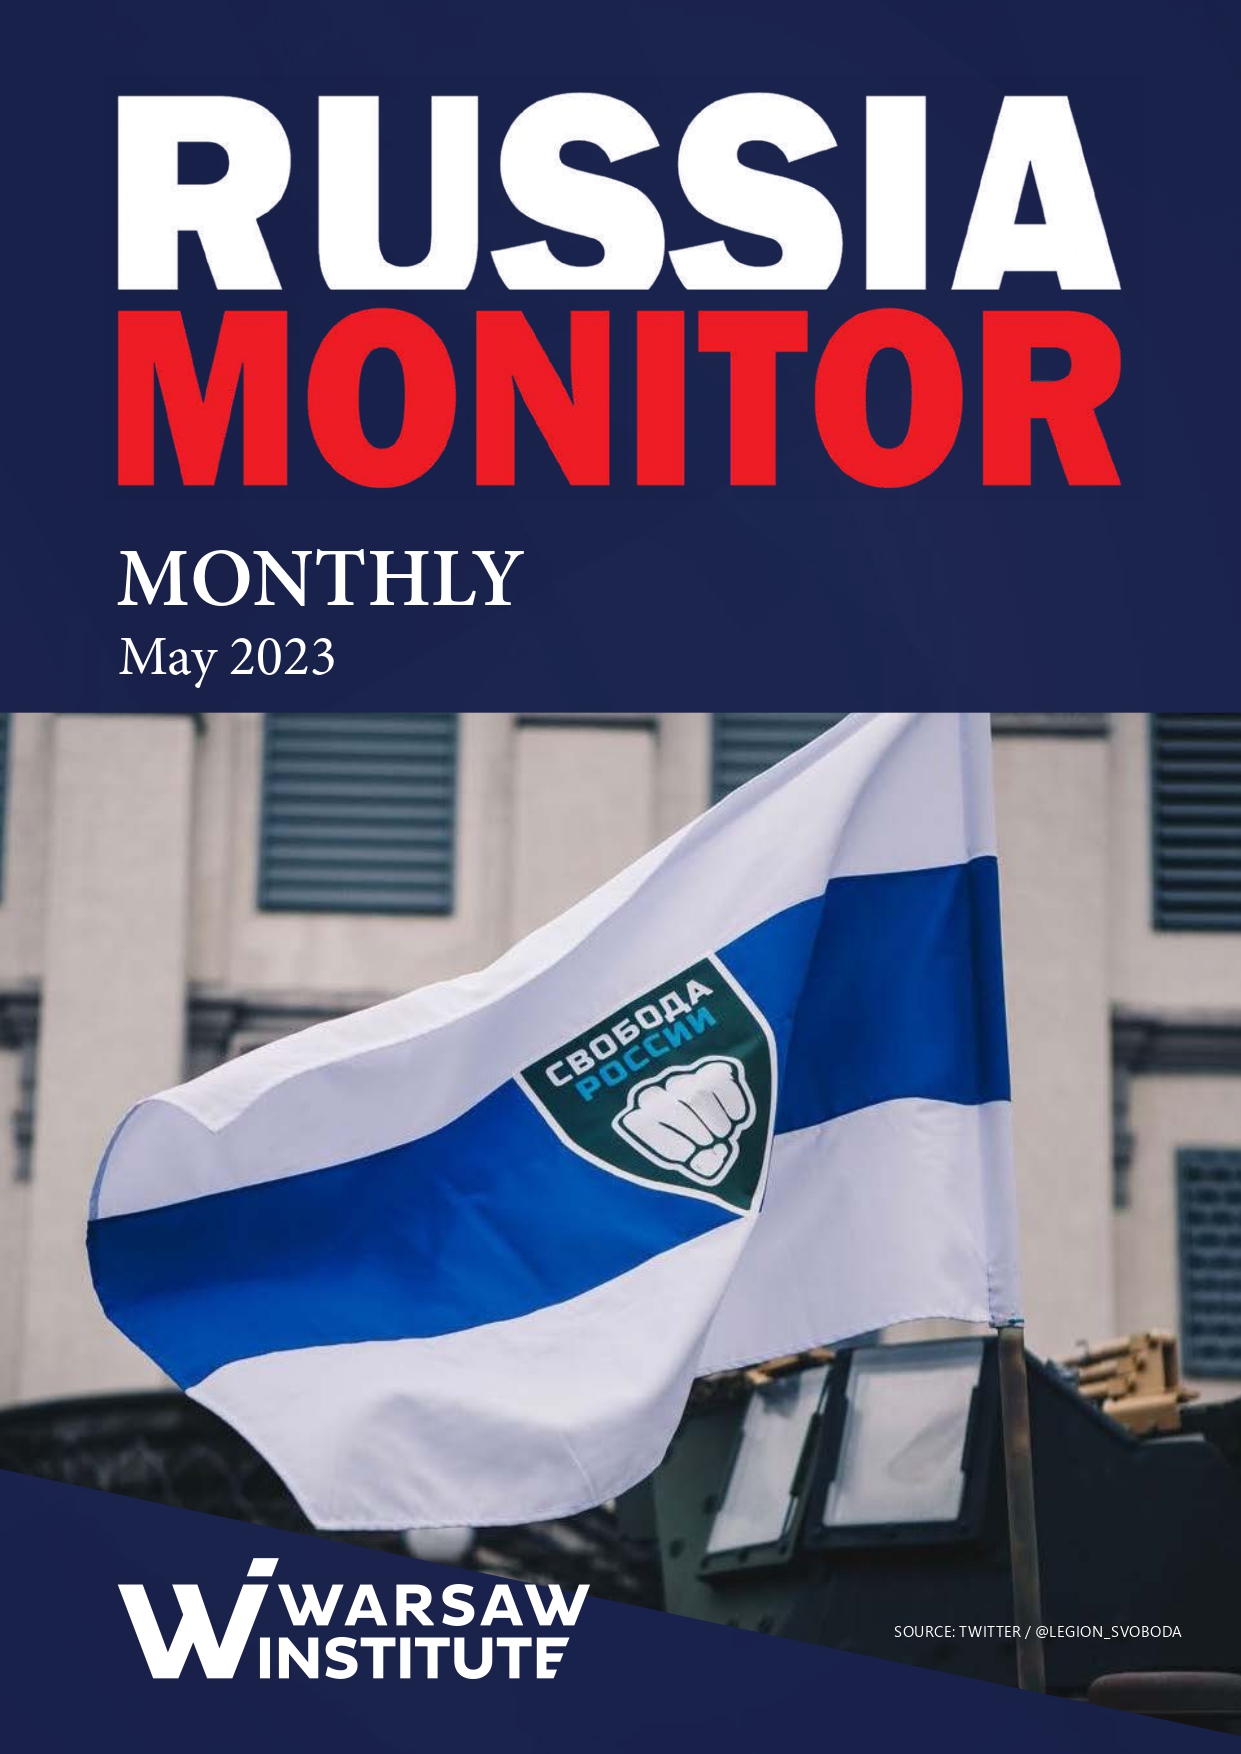 Russia Monitor Monthly 5/23